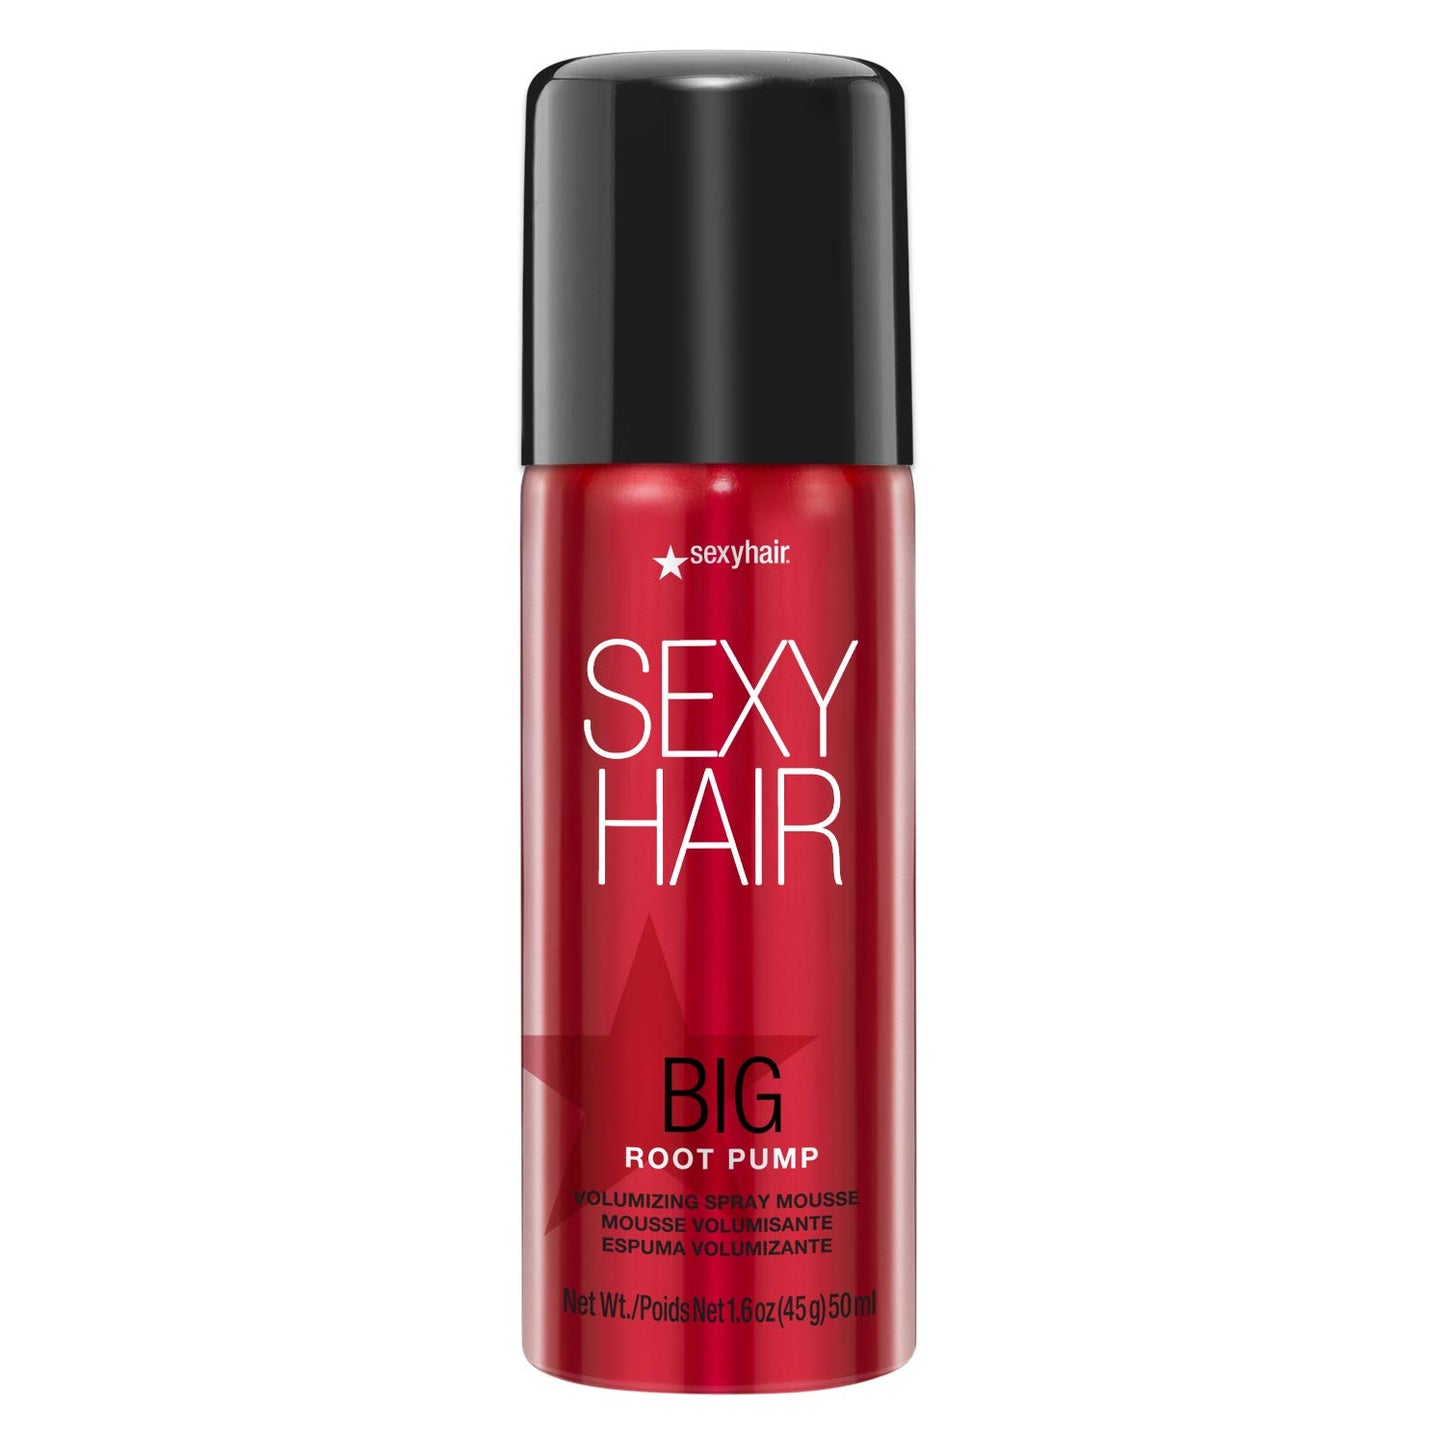 Sexy Hair Root Pump Mousse 9.60 oz